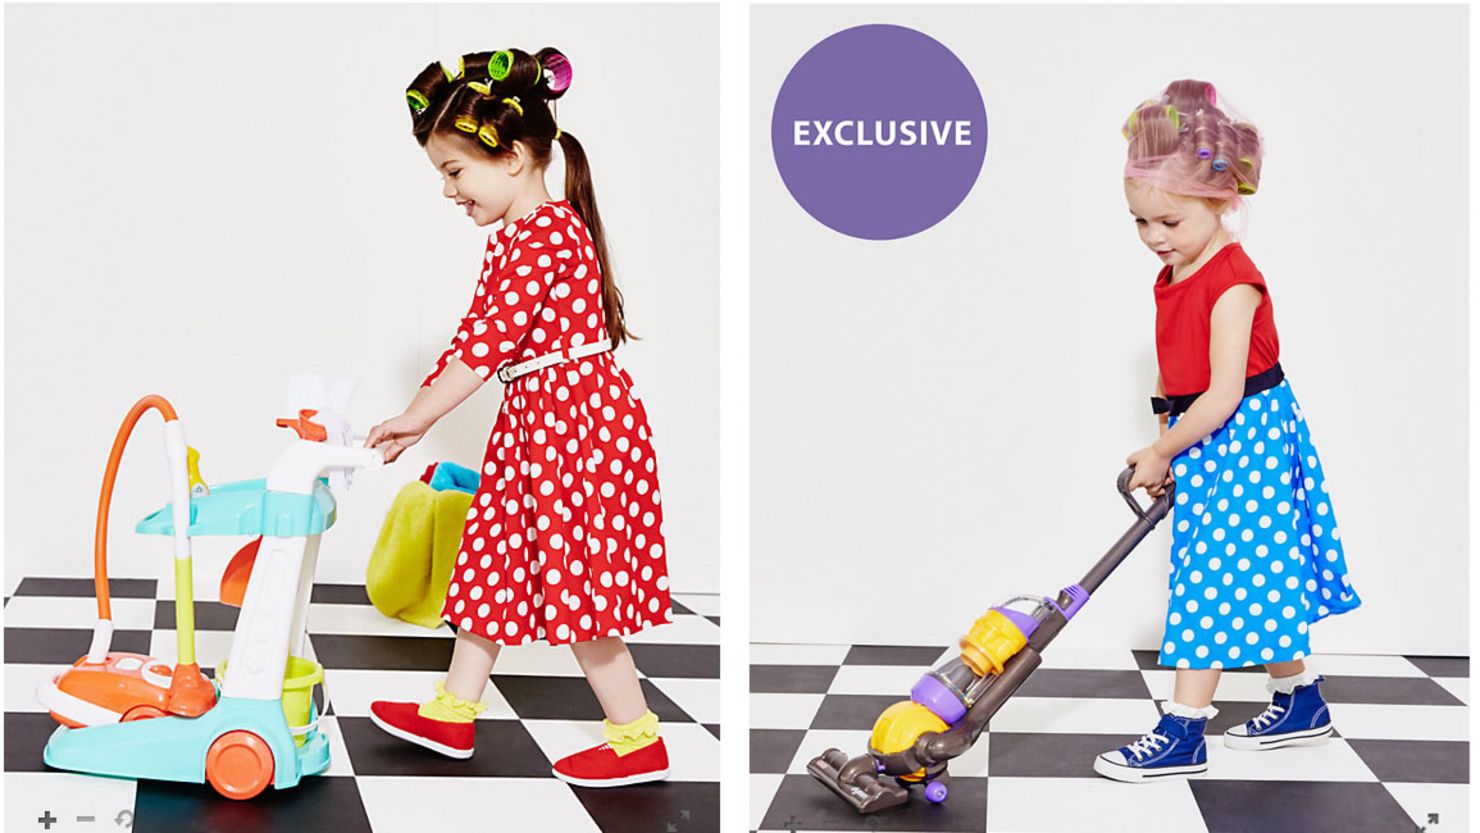 The images included girls in hair rollers pushing a cleaning trolley and vacuum.